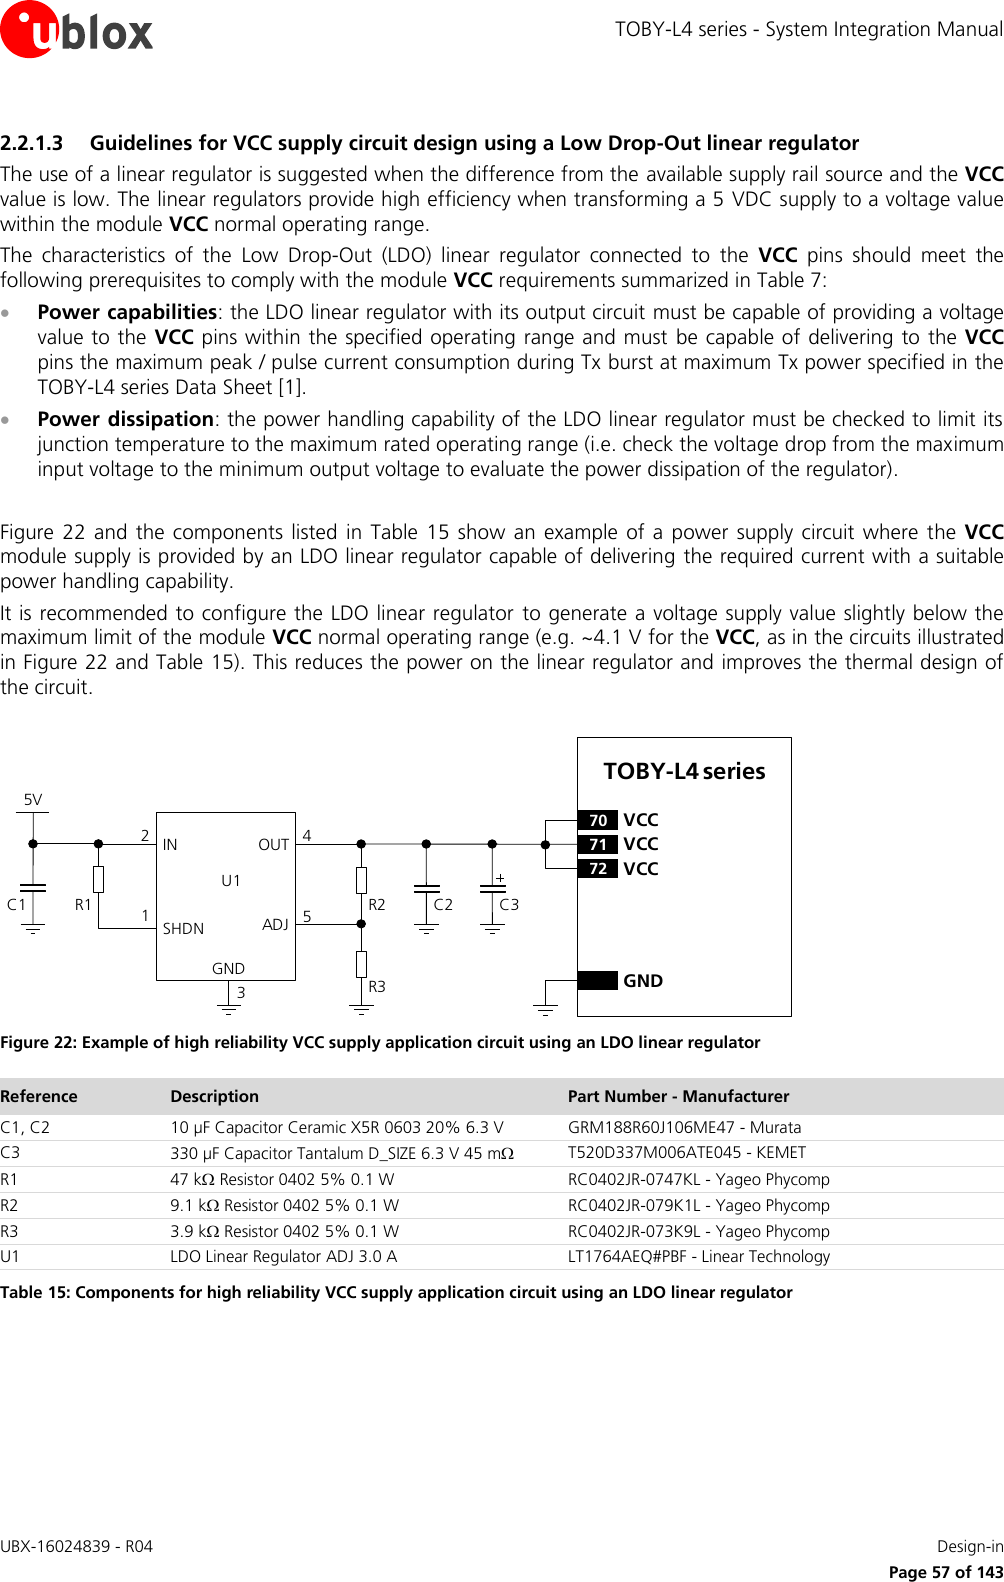 TOBY-L4 series - System Integration Manual UBX-16024839 - R04    Design-in     Page 57 of 143 2.2.1.3 Guidelines for VCC supply circuit design using a Low Drop-Out linear regulator The use of a linear regulator is suggested when the difference from the available supply rail source and the VCC value is low. The linear regulators provide high efficiency when transforming a 5 VDC supply to a voltage value within the module VCC normal operating range. The  characteristics  of  the  Low  Drop-Out  (LDO)  linear  regulator  connected  to  the  VCC  pins  should  meet  the following prerequisites to comply with the module VCC requirements summarized in Table 7:  Power capabilities: the LDO linear regulator with its output circuit must be capable of providing a voltage value to the VCC pins within the specified operating range and must  be capable of delivering to the VCC pins the maximum peak / pulse current consumption during Tx burst at maximum Tx power specified in the TOBY-L4 series Data Sheet [1].  Power dissipation: the power handling capability of the LDO linear regulator must be checked to limit its junction temperature to the maximum rated operating range (i.e. check the voltage drop from the maximum input voltage to the minimum output voltage to evaluate the power dissipation of the regulator).  Figure  22  and  the  components  listed  in  Table  15  show  an example  of a  power  supply circuit  where  the  VCC module supply is provided by an LDO linear regulator capable of delivering  the required current with a suitable power handling capability. It is recommended to configure the LDO linear regulator  to generate a voltage supply value slightly below the maximum limit of the module VCC normal operating range (e.g. ~4.1 V for the VCC, as in the circuits illustrated in Figure 22 and Table 15). This reduces the power on the linear regulator and improves the thermal design of the circuit.  5VC1 R1IN OUTADJGND12453C2R2R3U1SHDNTOBY-L4 series71 VCC72 VCC70 VCCGNDC3 Figure 22: Example of high reliability VCC supply application circuit using an LDO linear regulator Reference Description Part Number - Manufacturer C1, C2 10 µF Capacitor Ceramic X5R 0603 20% 6.3 V GRM188R60J106ME47 - Murata C3 330 µF Capacitor Tantalum D_SIZE 6.3 V 45 m T520D337M006ATE045 - KEMET R1 47 k Resistor 0402 5% 0.1 W RC0402JR-0747KL - Yageo Phycomp R2 9.1 k Resistor 0402 5% 0.1 W RC0402JR-079K1L - Yageo Phycomp R3 3.9 k Resistor 0402 5% 0.1 W RC0402JR-073K9L - Yageo Phycomp U1 LDO Linear Regulator ADJ 3.0 A LT1764AEQ#PBF - Linear Technology Table 15: Components for high reliability VCC supply application circuit using an LDO linear regulator 